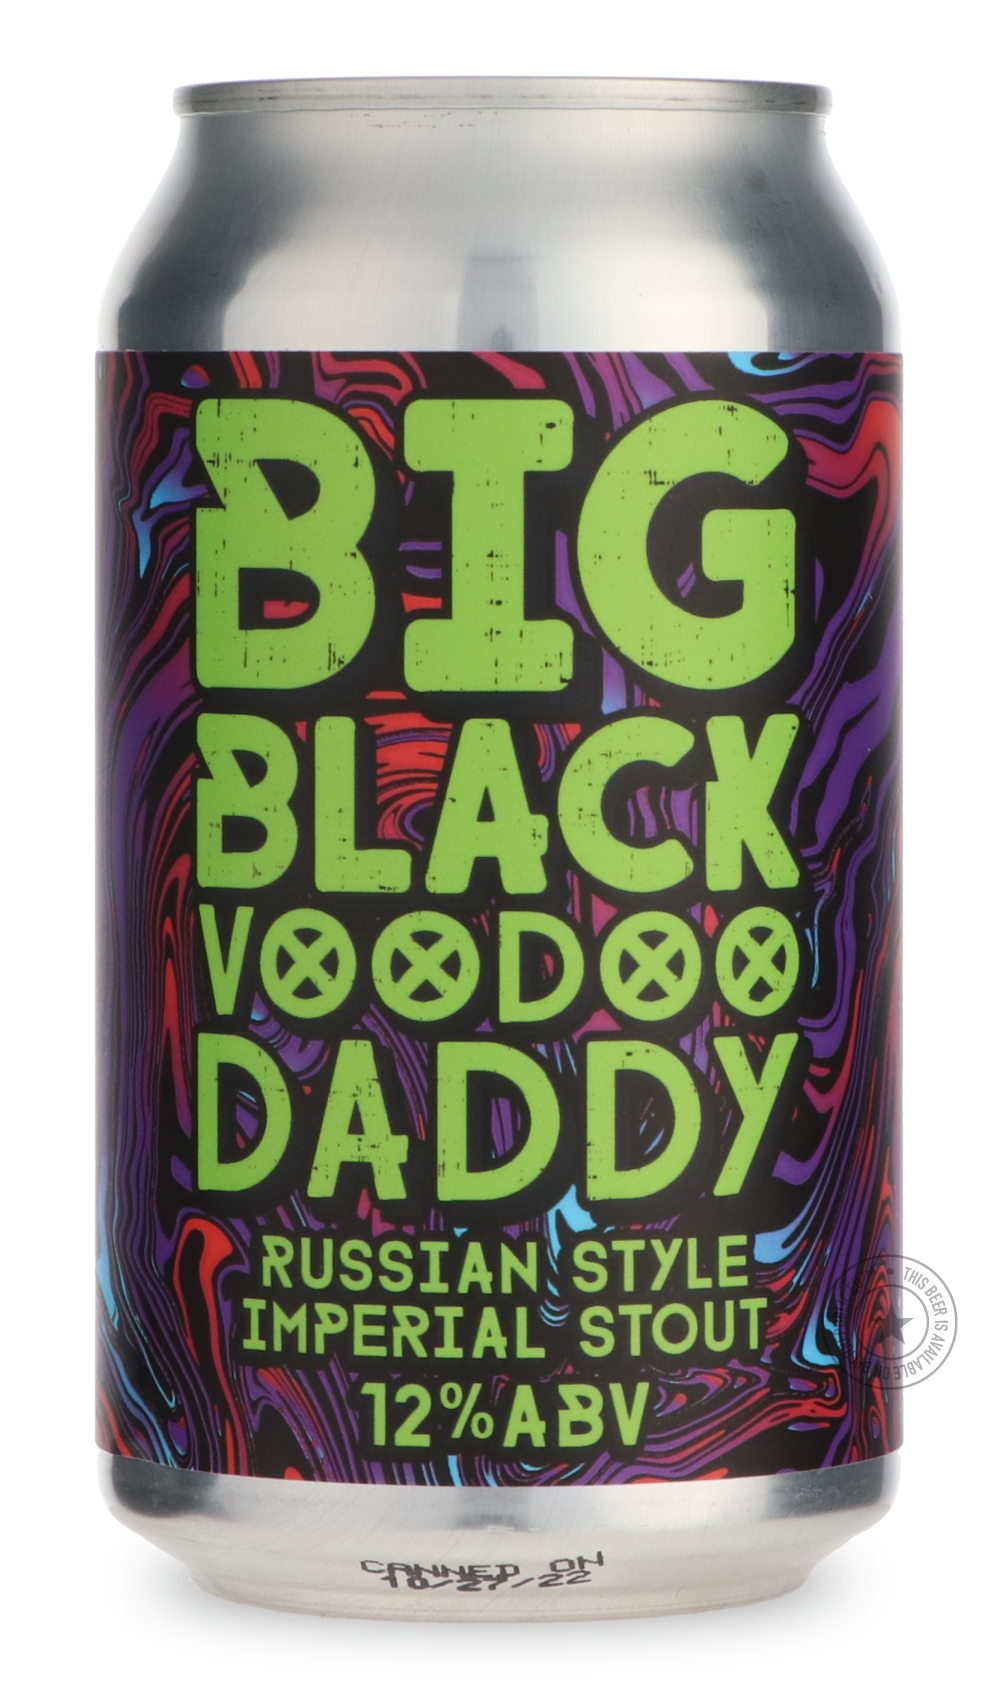 -Voodoo- Big Black Voodoo Daddy-Stout & Porter- Only @ Beer Republic - The best online beer store for American & Canadian craft beer - Buy beer online from the USA and Canada - Bier online kopen - Amerikaans bier kopen - Craft beer store - Craft beer kopen - Amerikanisch bier kaufen - Bier online kaufen - Acheter biere online - IPA - Stout - Porter - New England IPA - Hazy IPA - Imperial Stout - Barrel Aged - Barrel Aged Imperial Stout - Brown - Dark beer - Blond - Blonde - Pilsner - Lager - Wheat - Weizen 